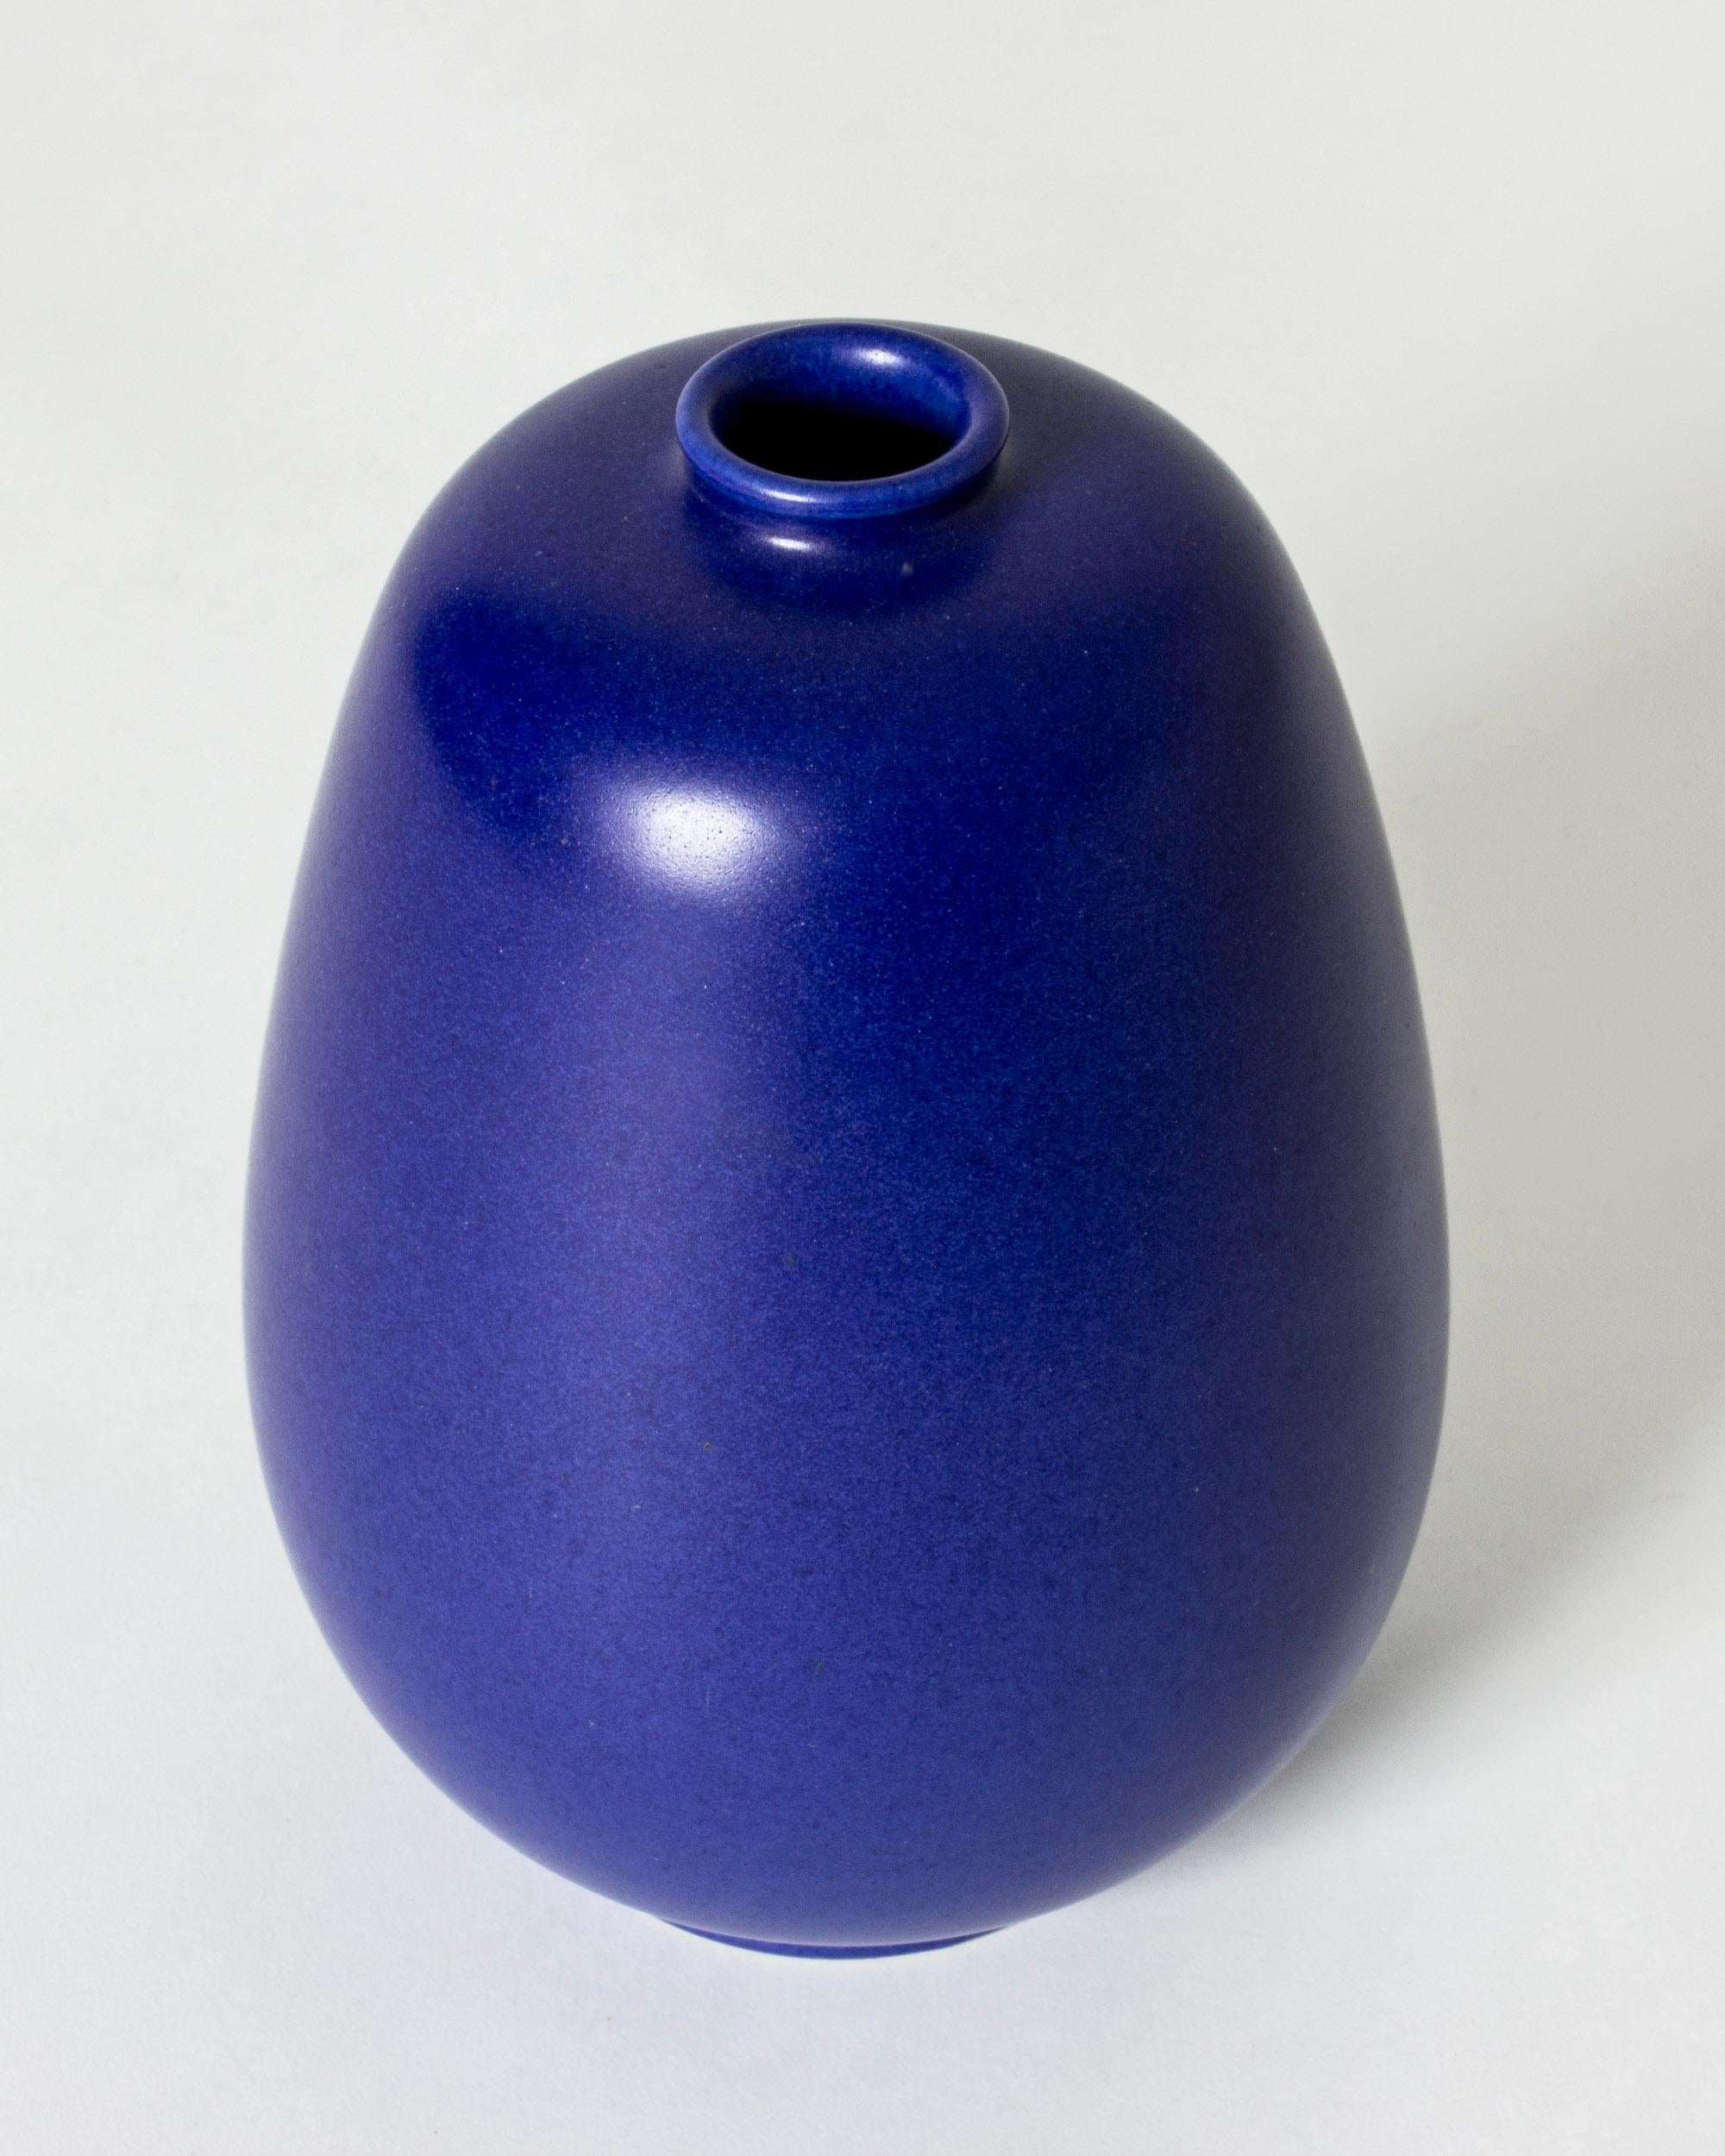 Striking stoneware vase by Eric and Ingrid Triller, in a streamlined, compact shape. Beautiful, opaque cobalt blue glaze.

Fleeing World War II, German potters Eric and Ingrid Triller settled in the industrial village Tobo and started making their